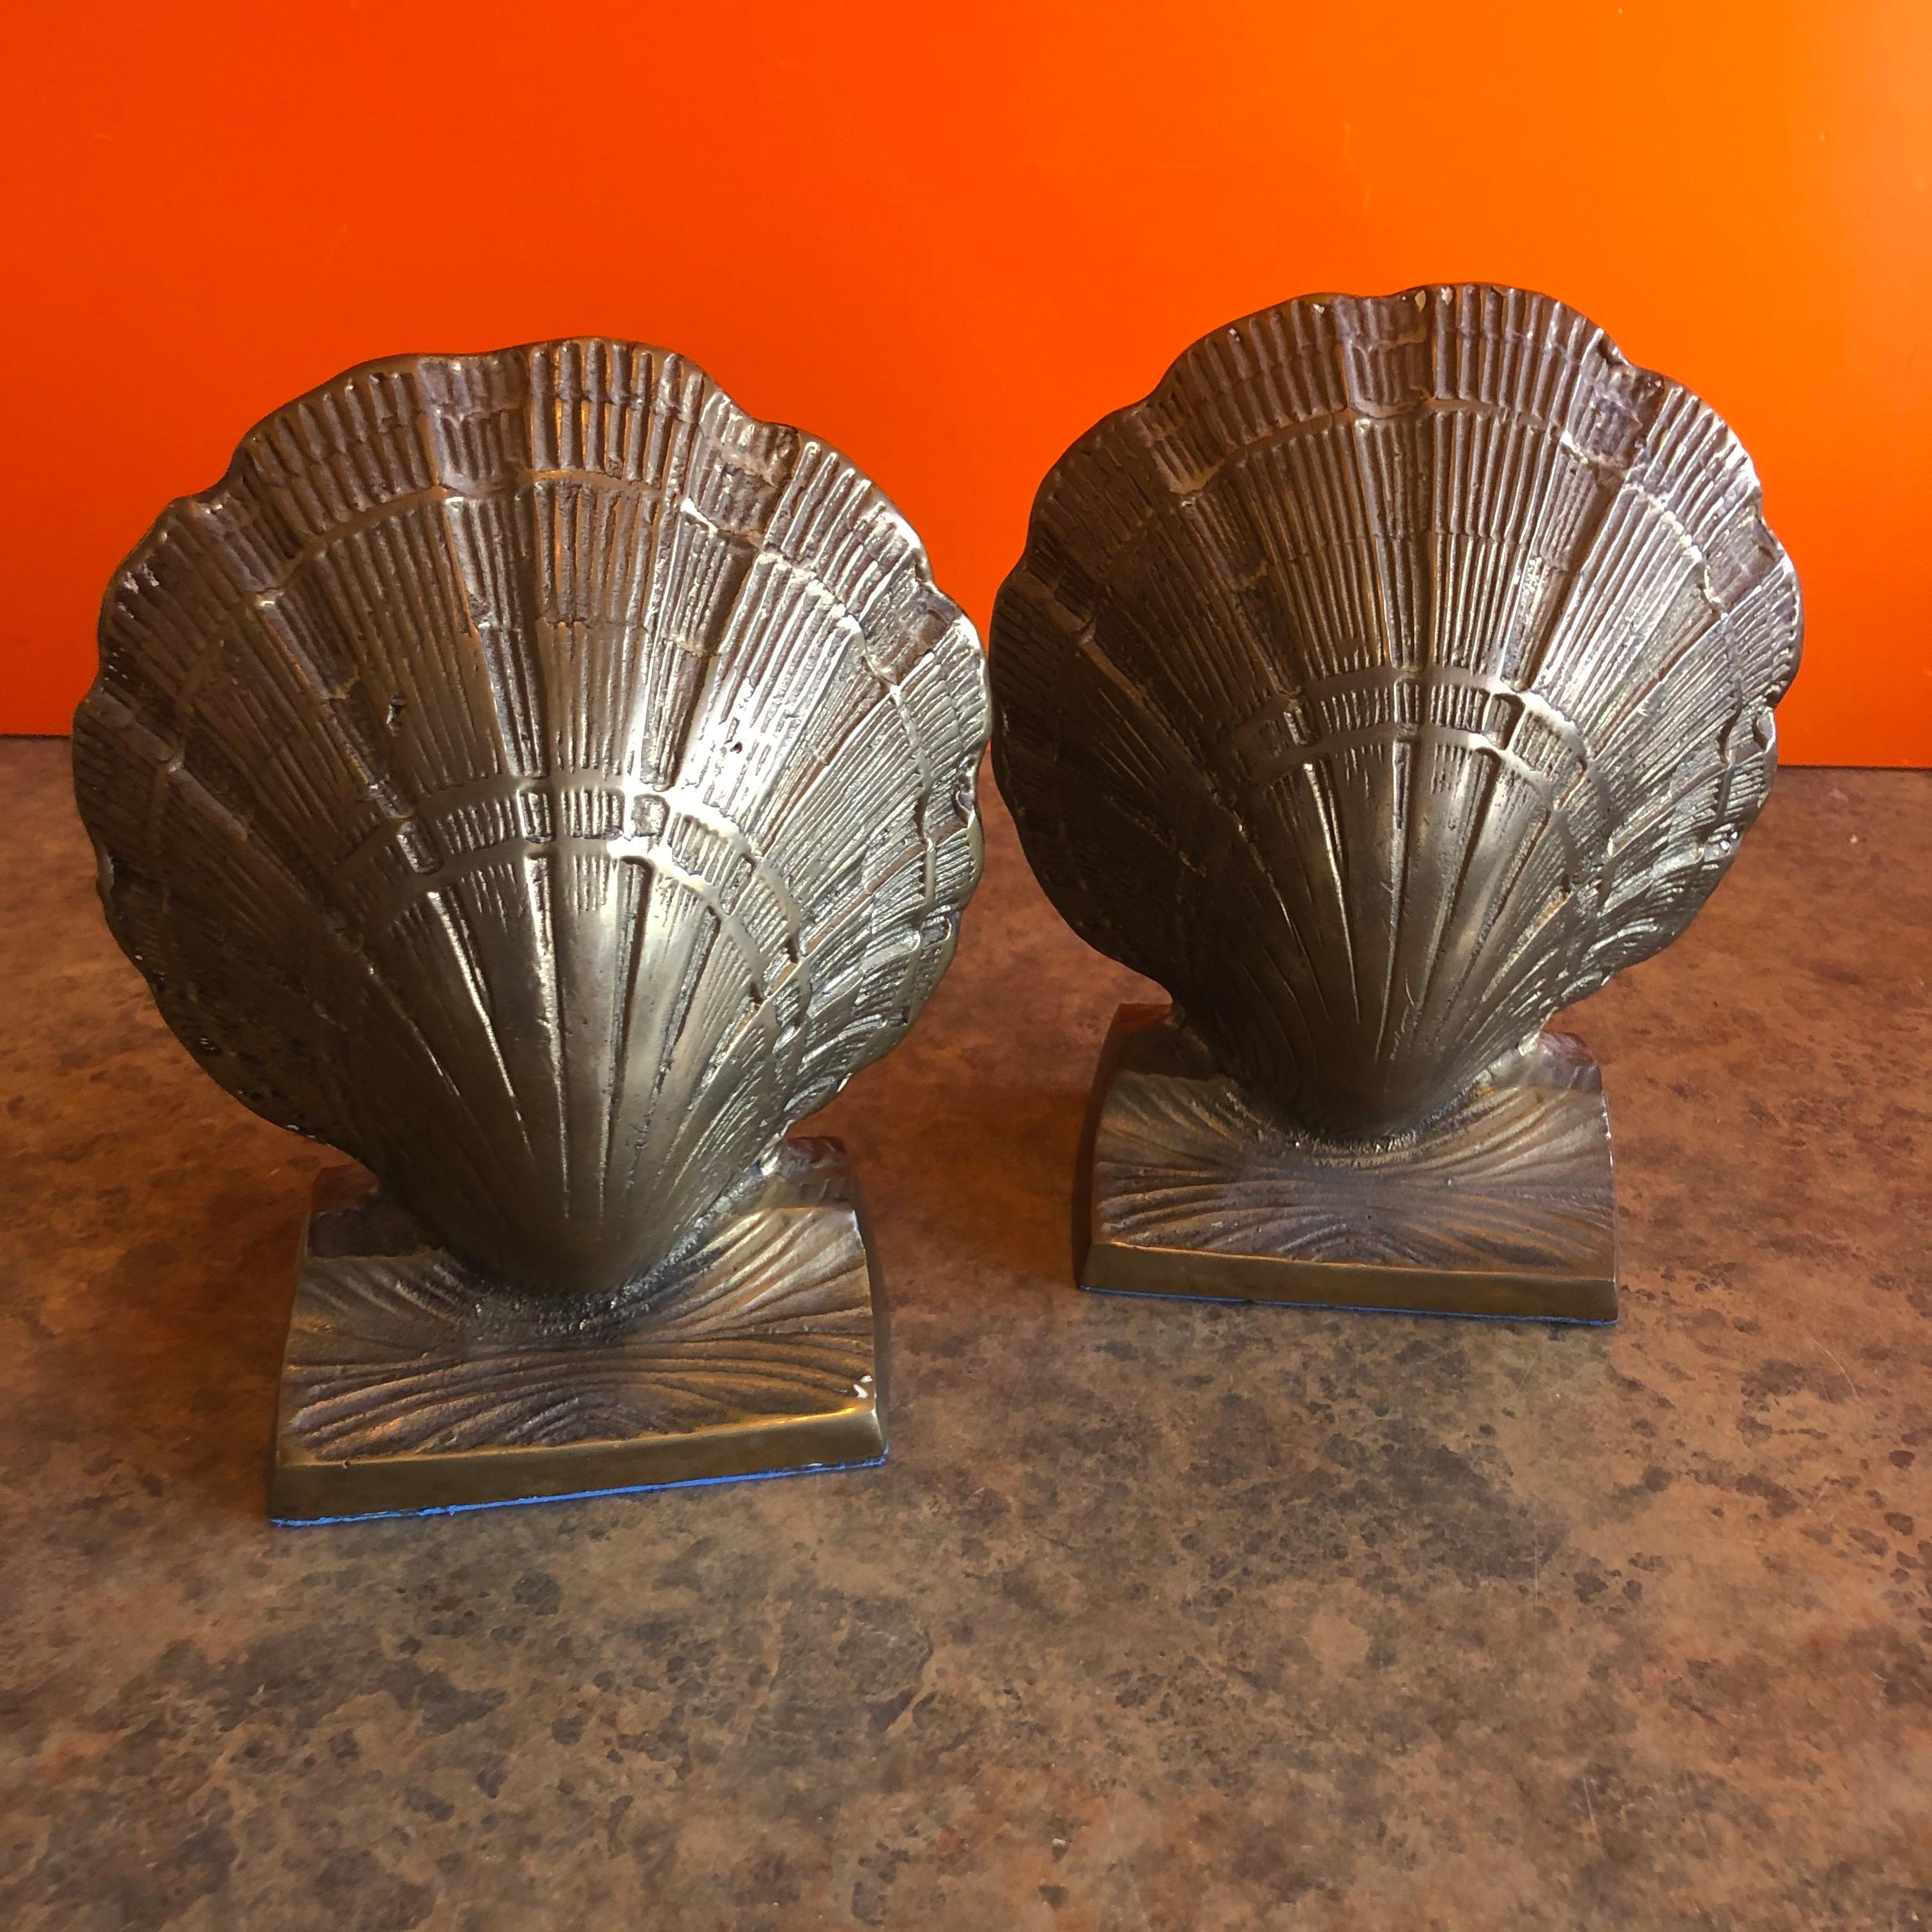 Pair of vintage brass clam shell bookends from Korea, circa 1970s.